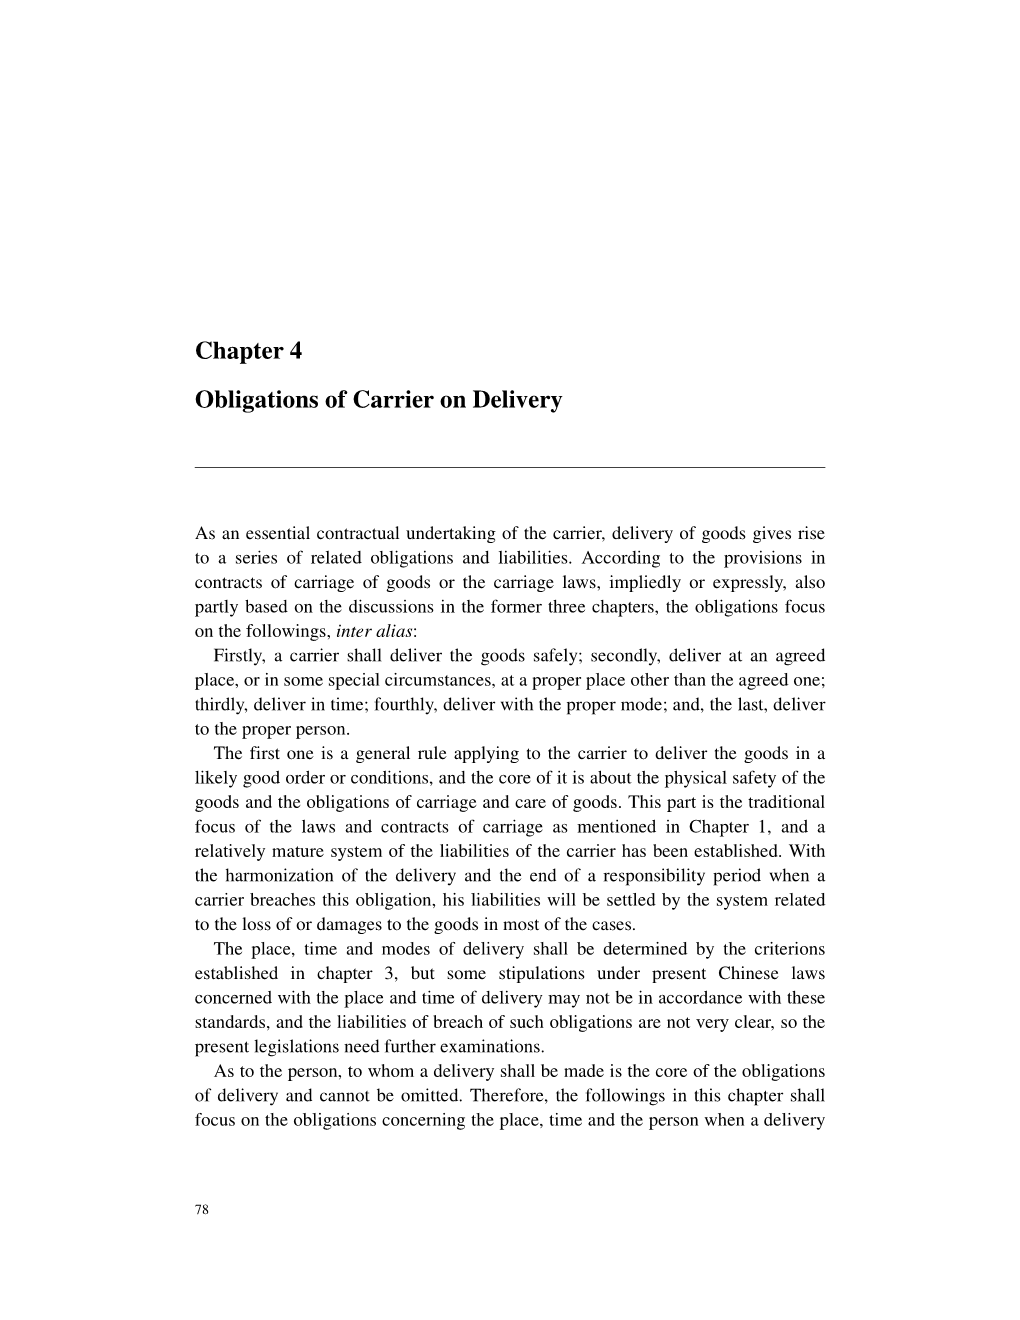 Chapter 4 Obligations of Carrier on Delivery